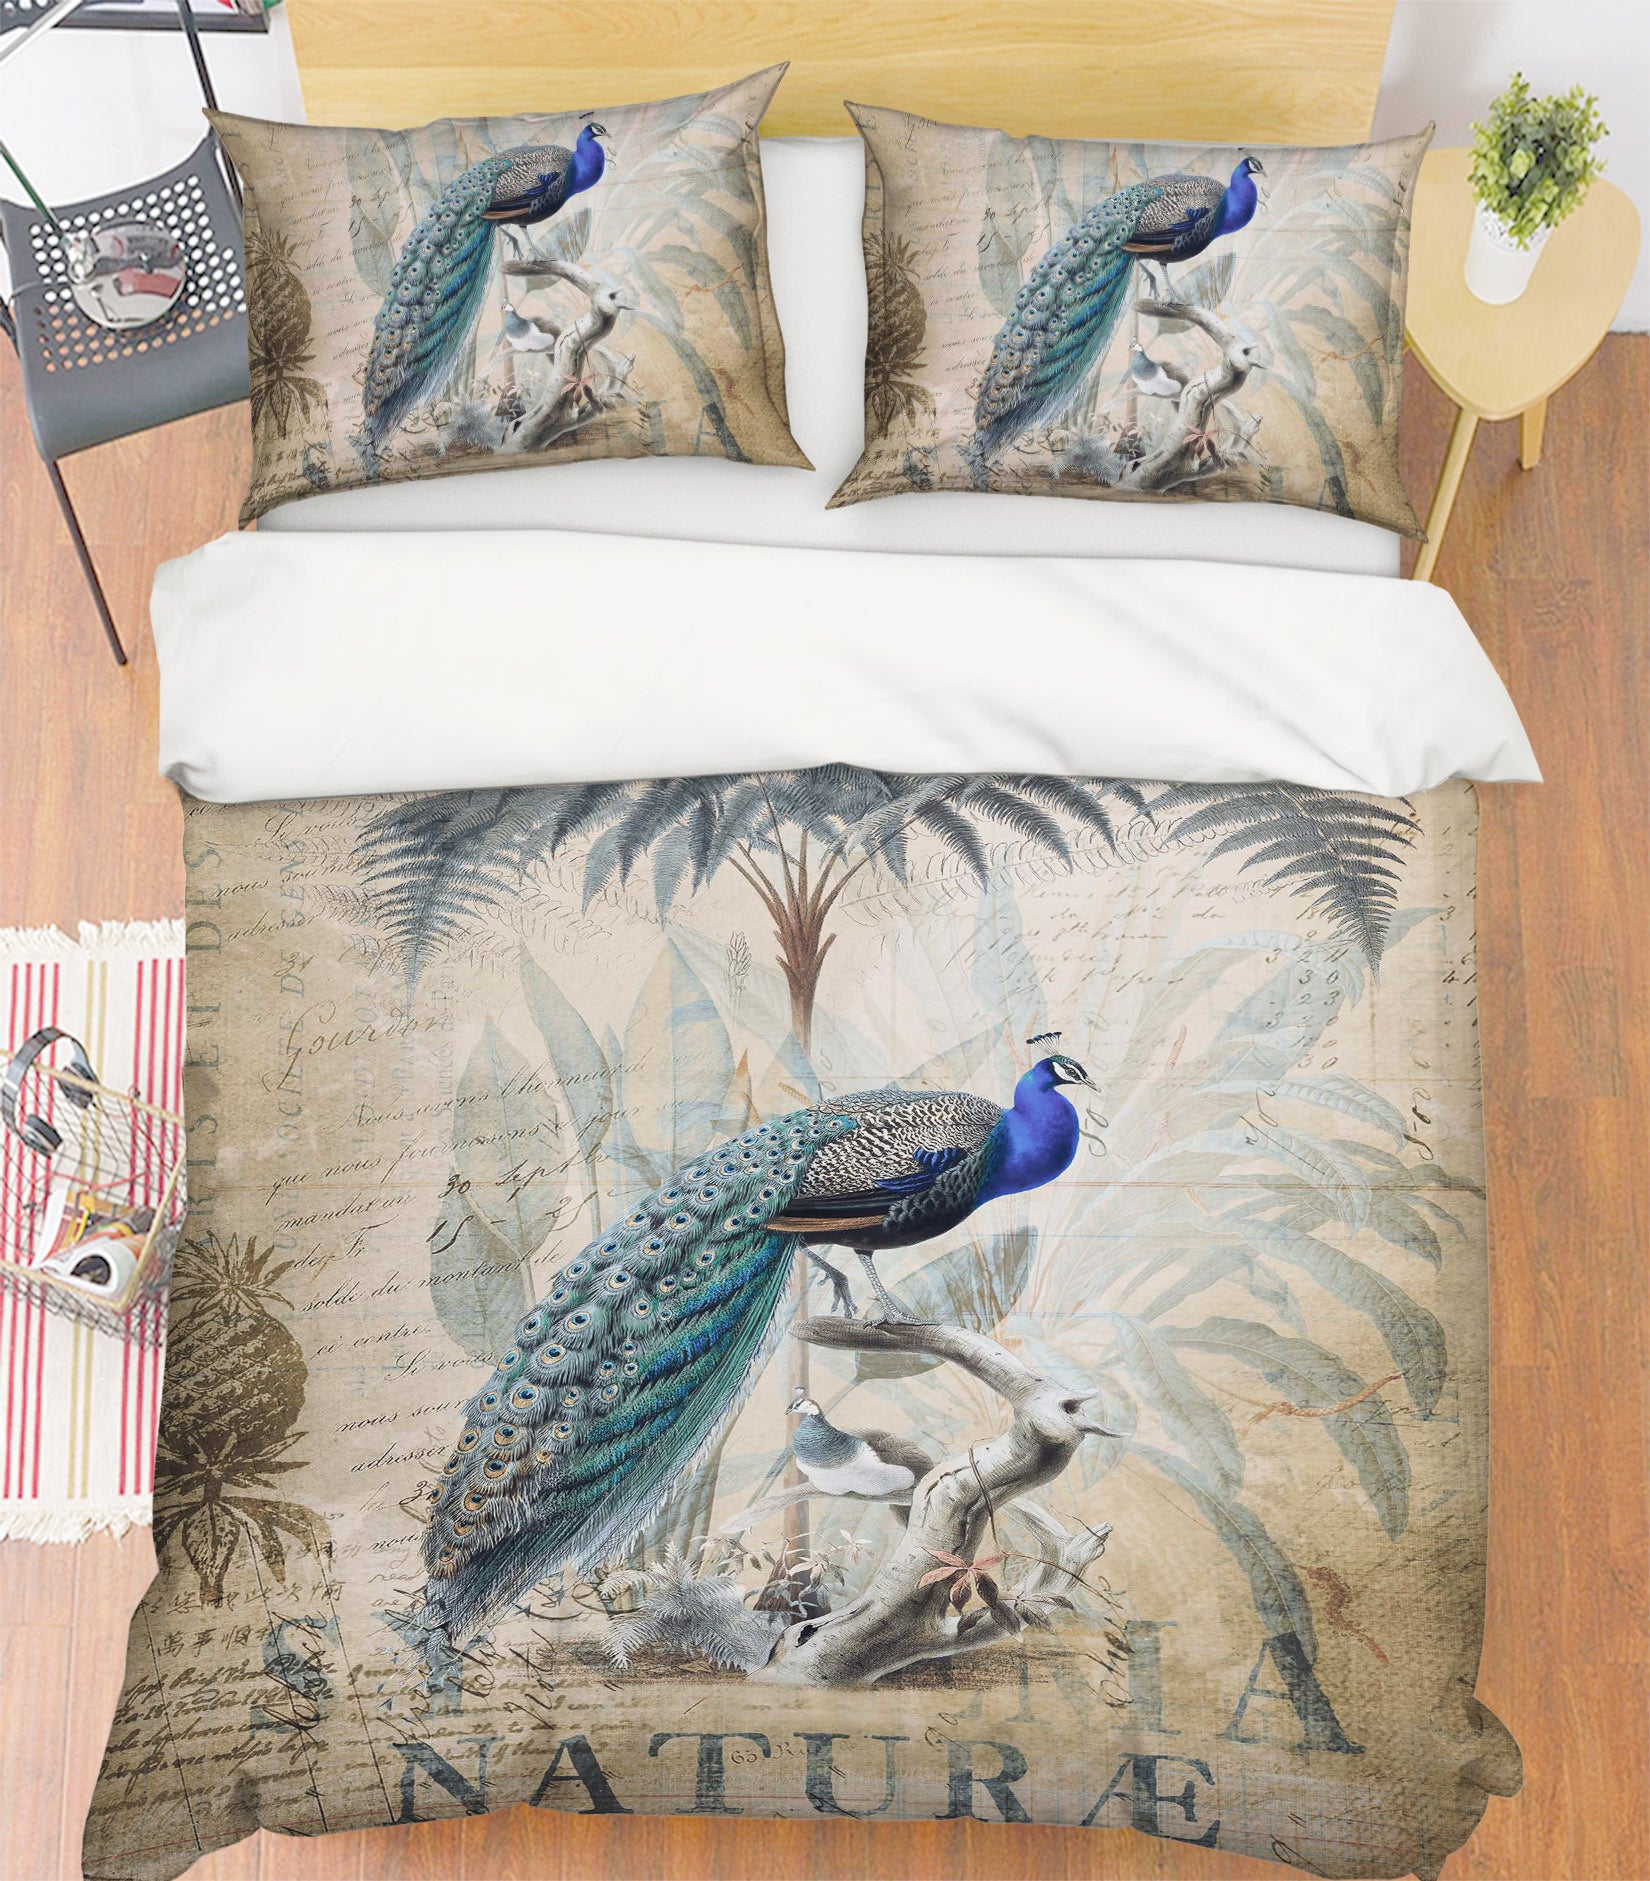 3D Forest Peacock 107 Andrea haase Bedding Bed Pillowcases Quilt